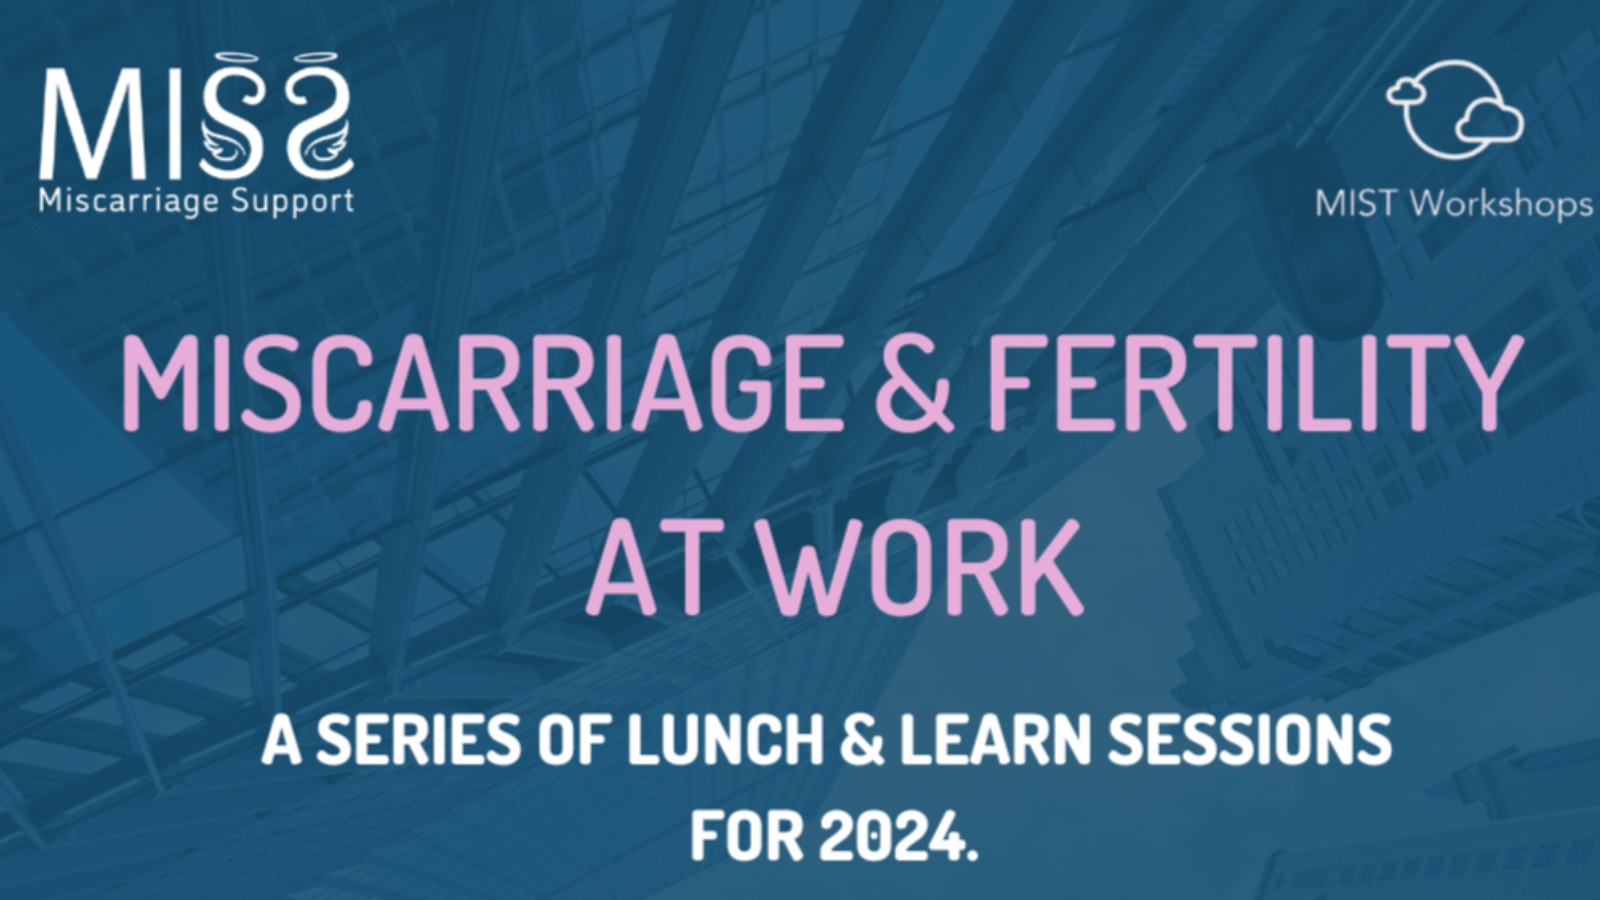 Free 'Miscarriage & Fertility at Work' training available.